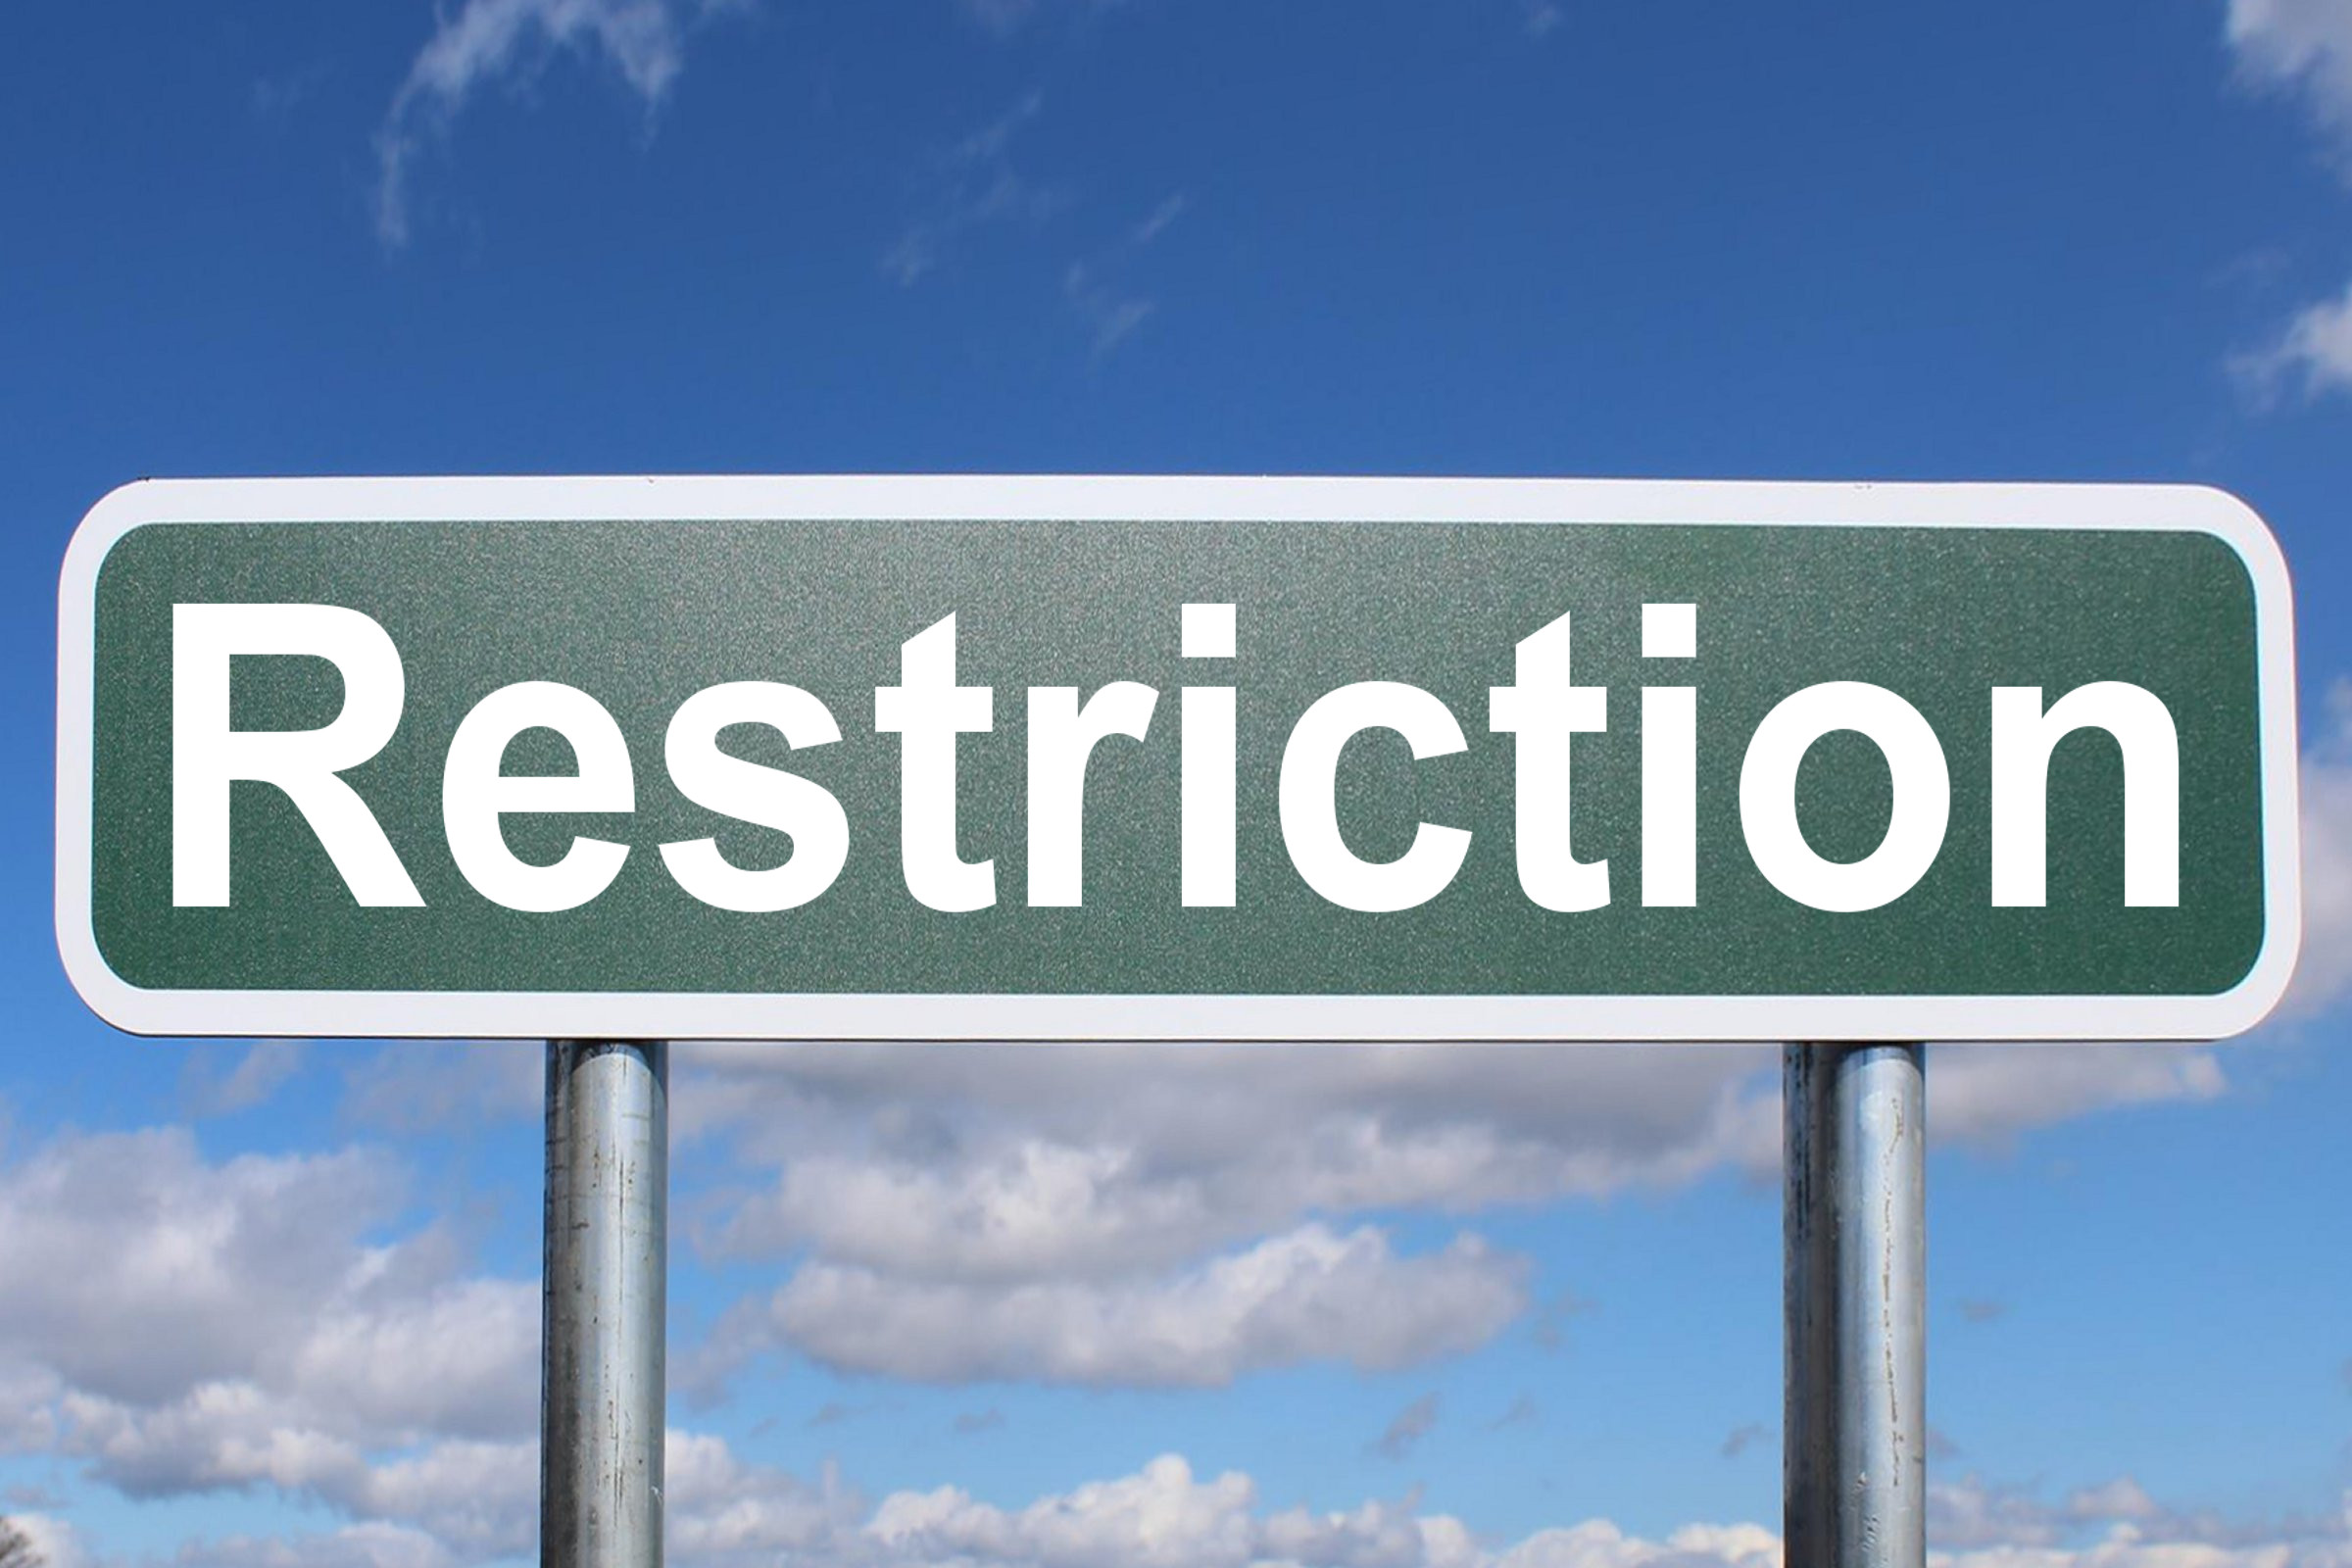 Restriction - Free of Charge Creative Commons Highway sign image